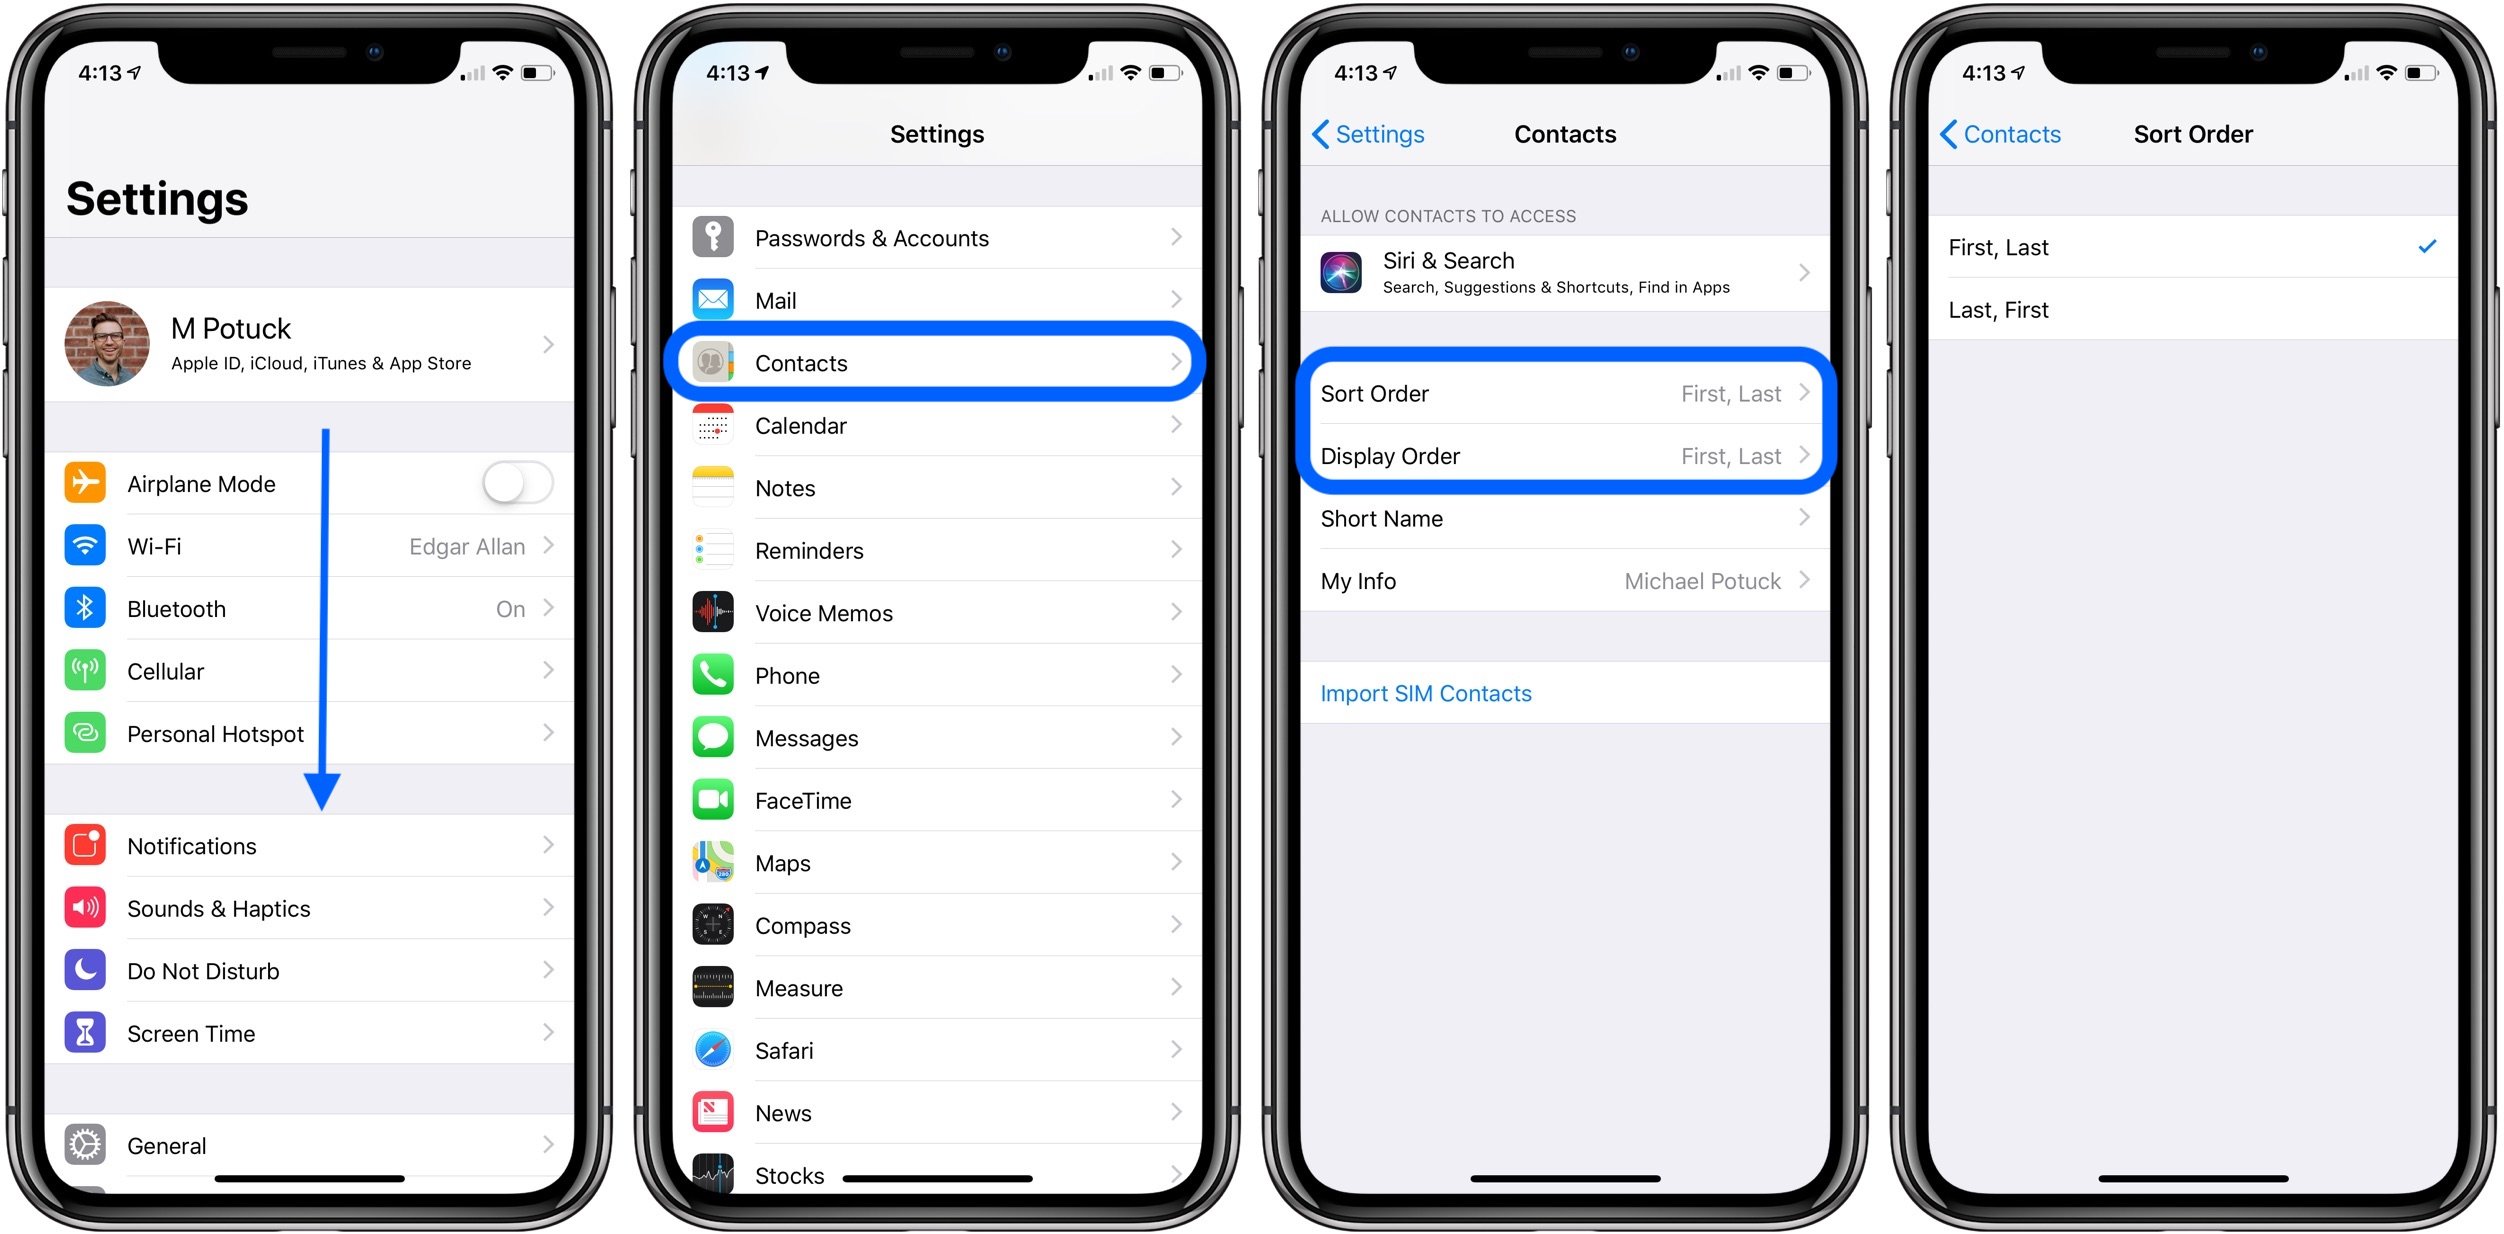 iPhone: How to change contacts sort order and display order